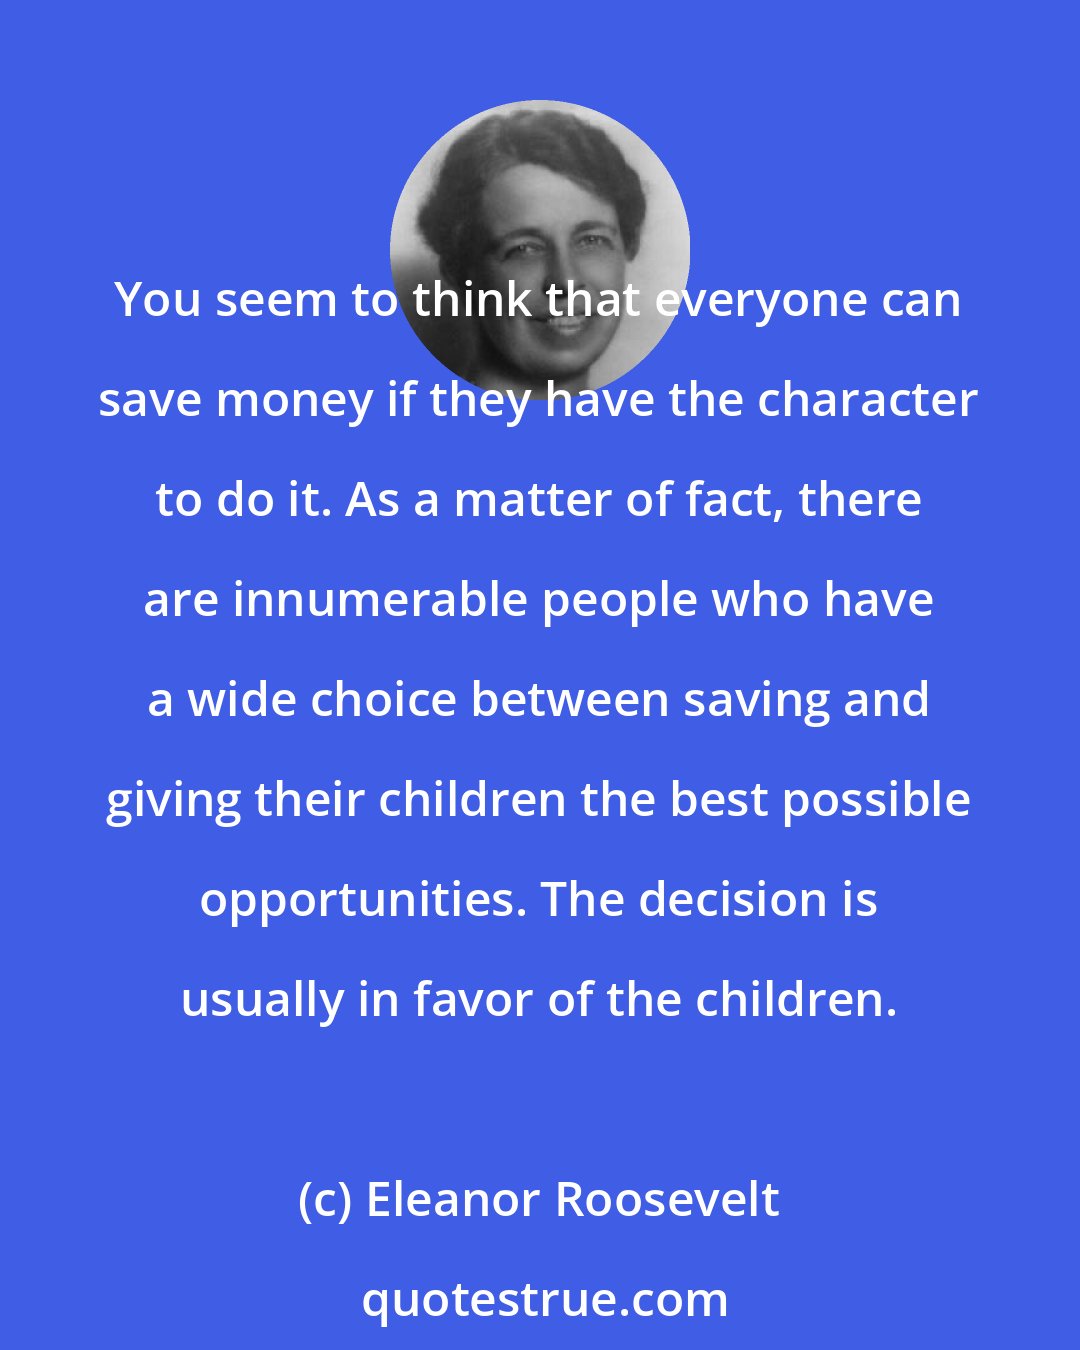 Eleanor Roosevelt: You seem to think that everyone can save money if they have the character to do it. As a matter of fact, there are innumerable people who have a wide choice between saving and giving their children the best possible opportunities. The decision is usually in favor of the children.